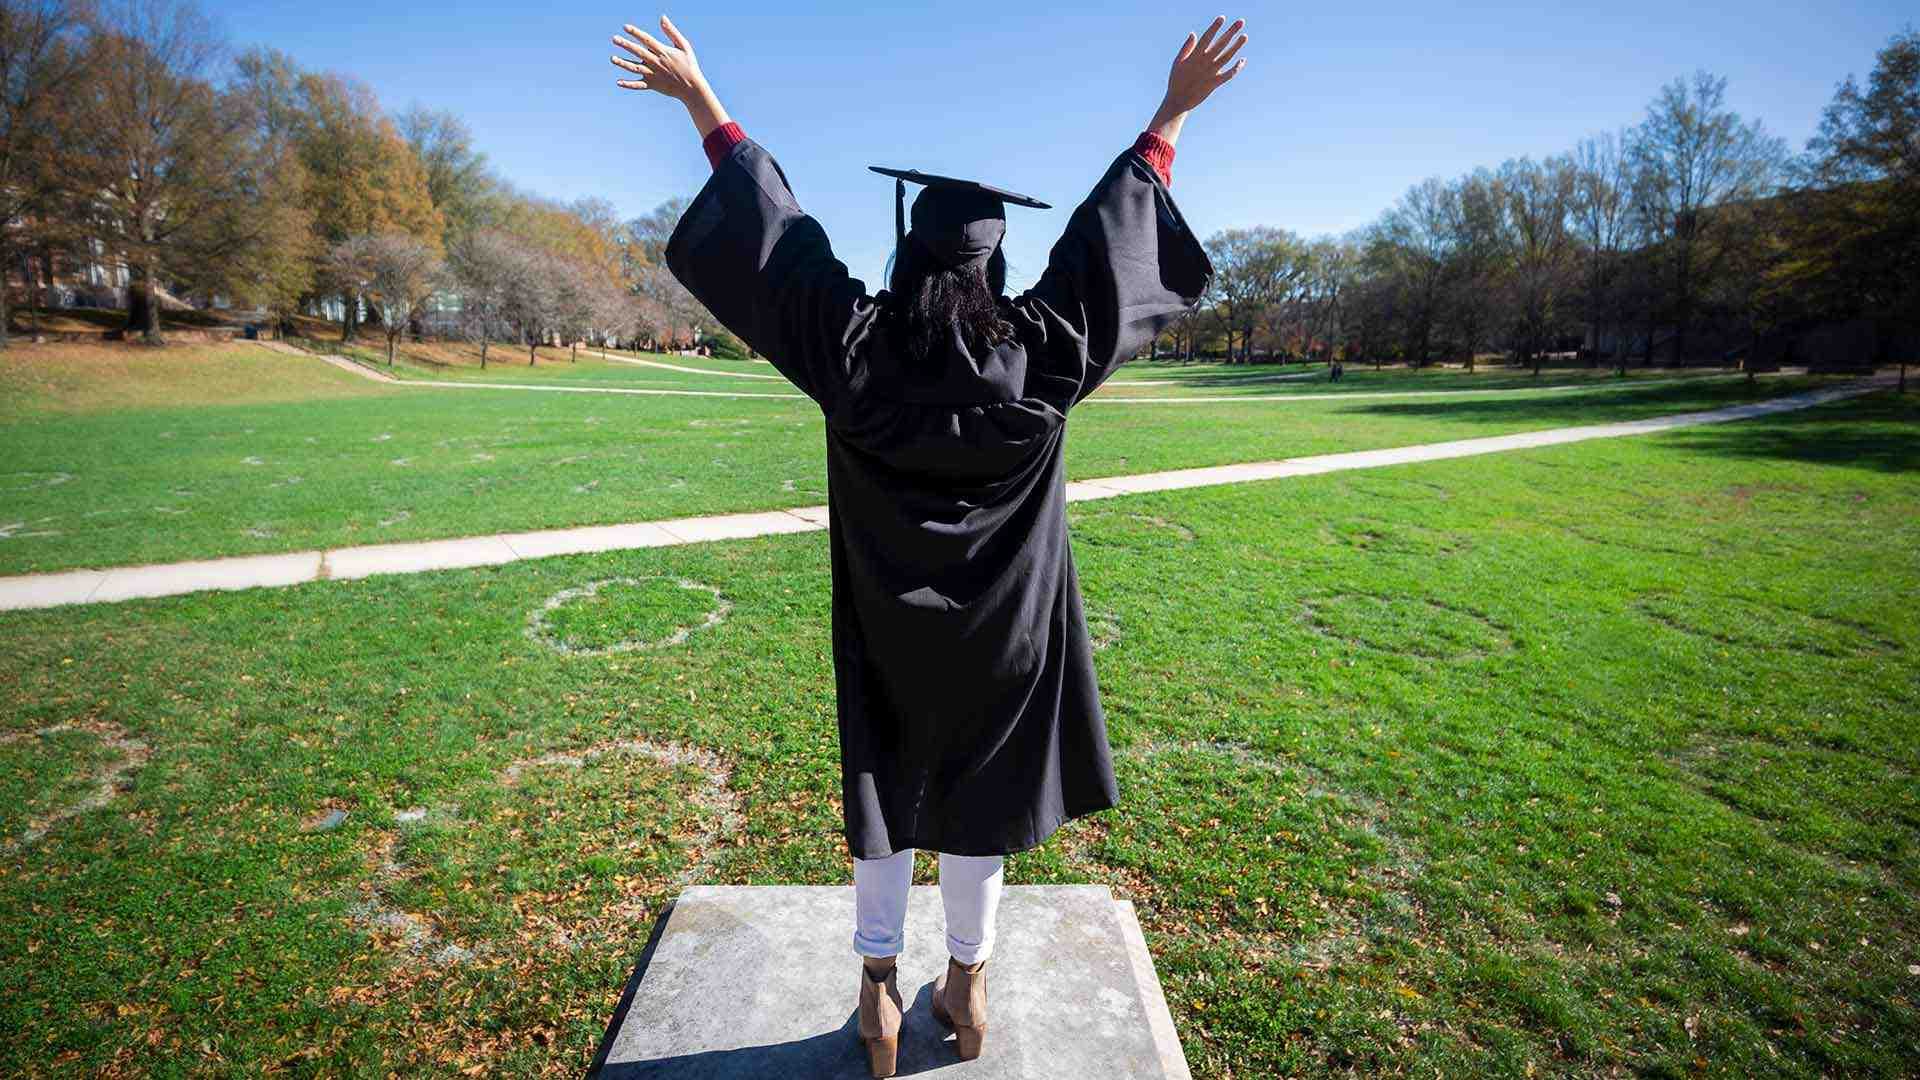 Student faced away from camera dressed in black cap and gown with arms lifted up in celebration against a green background of grass